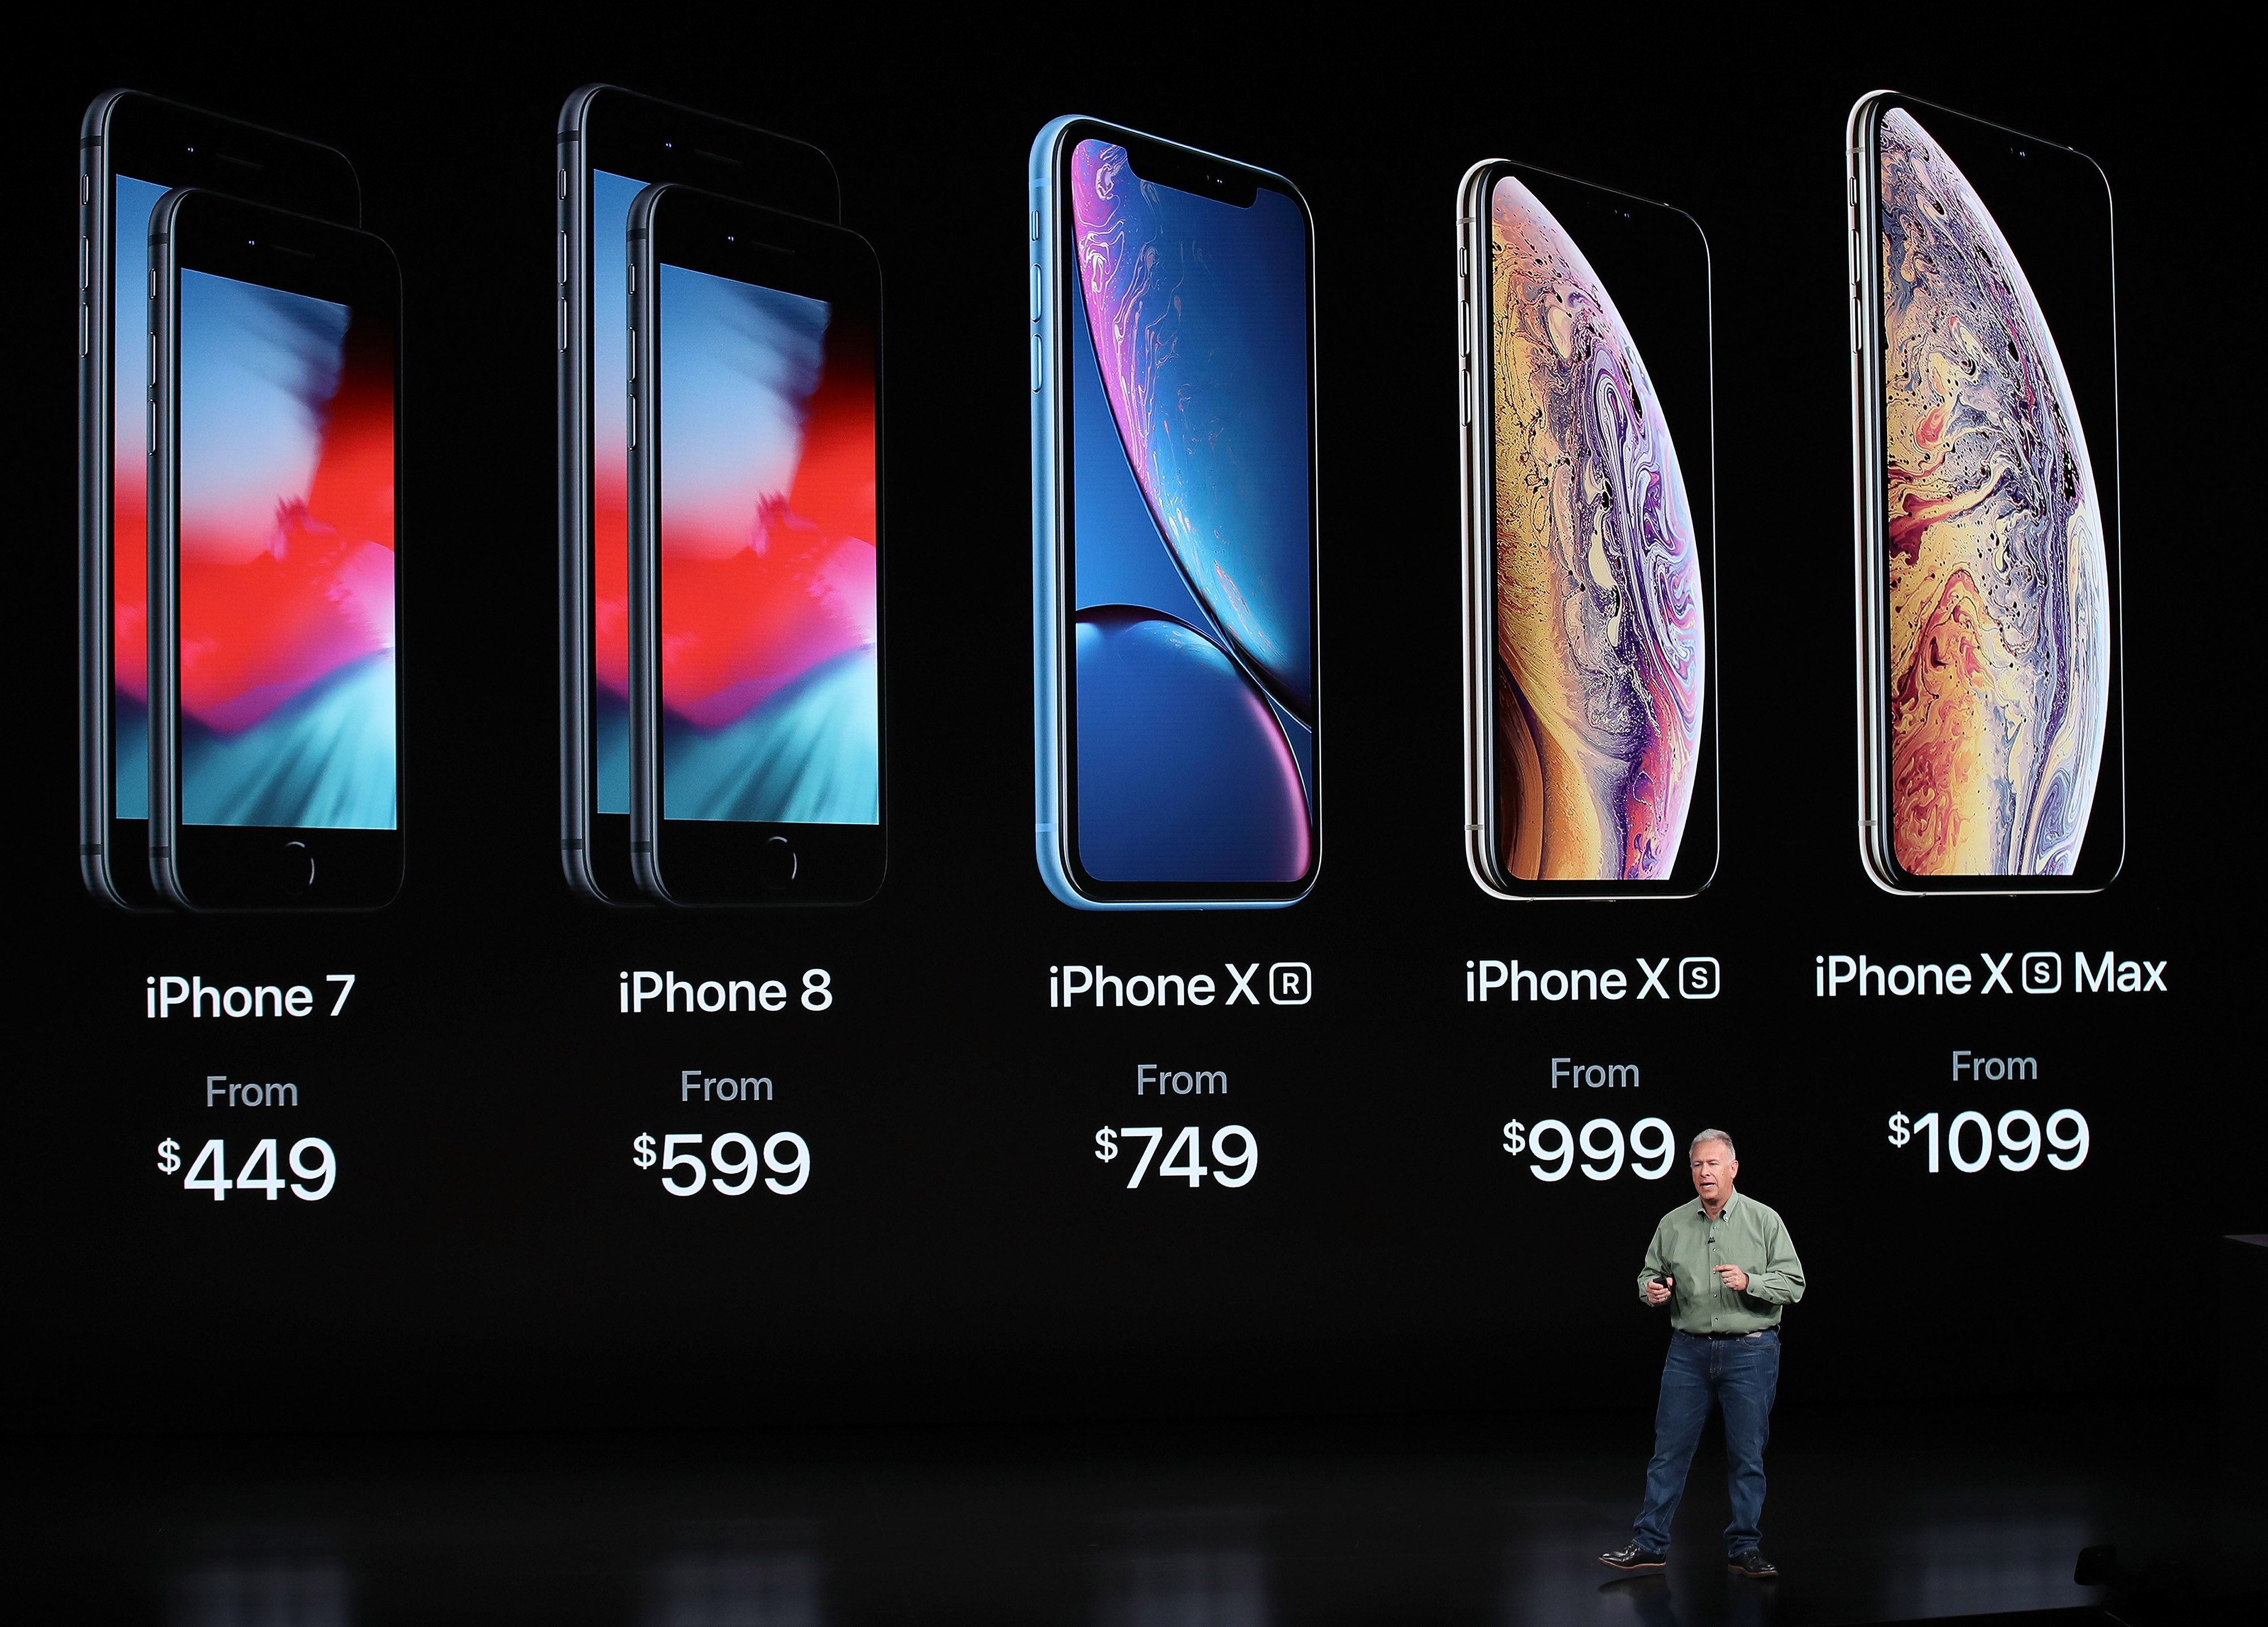 All New Iphones Launched At Apple 2018 Event Iphone Xs Xr And Xs Max Details